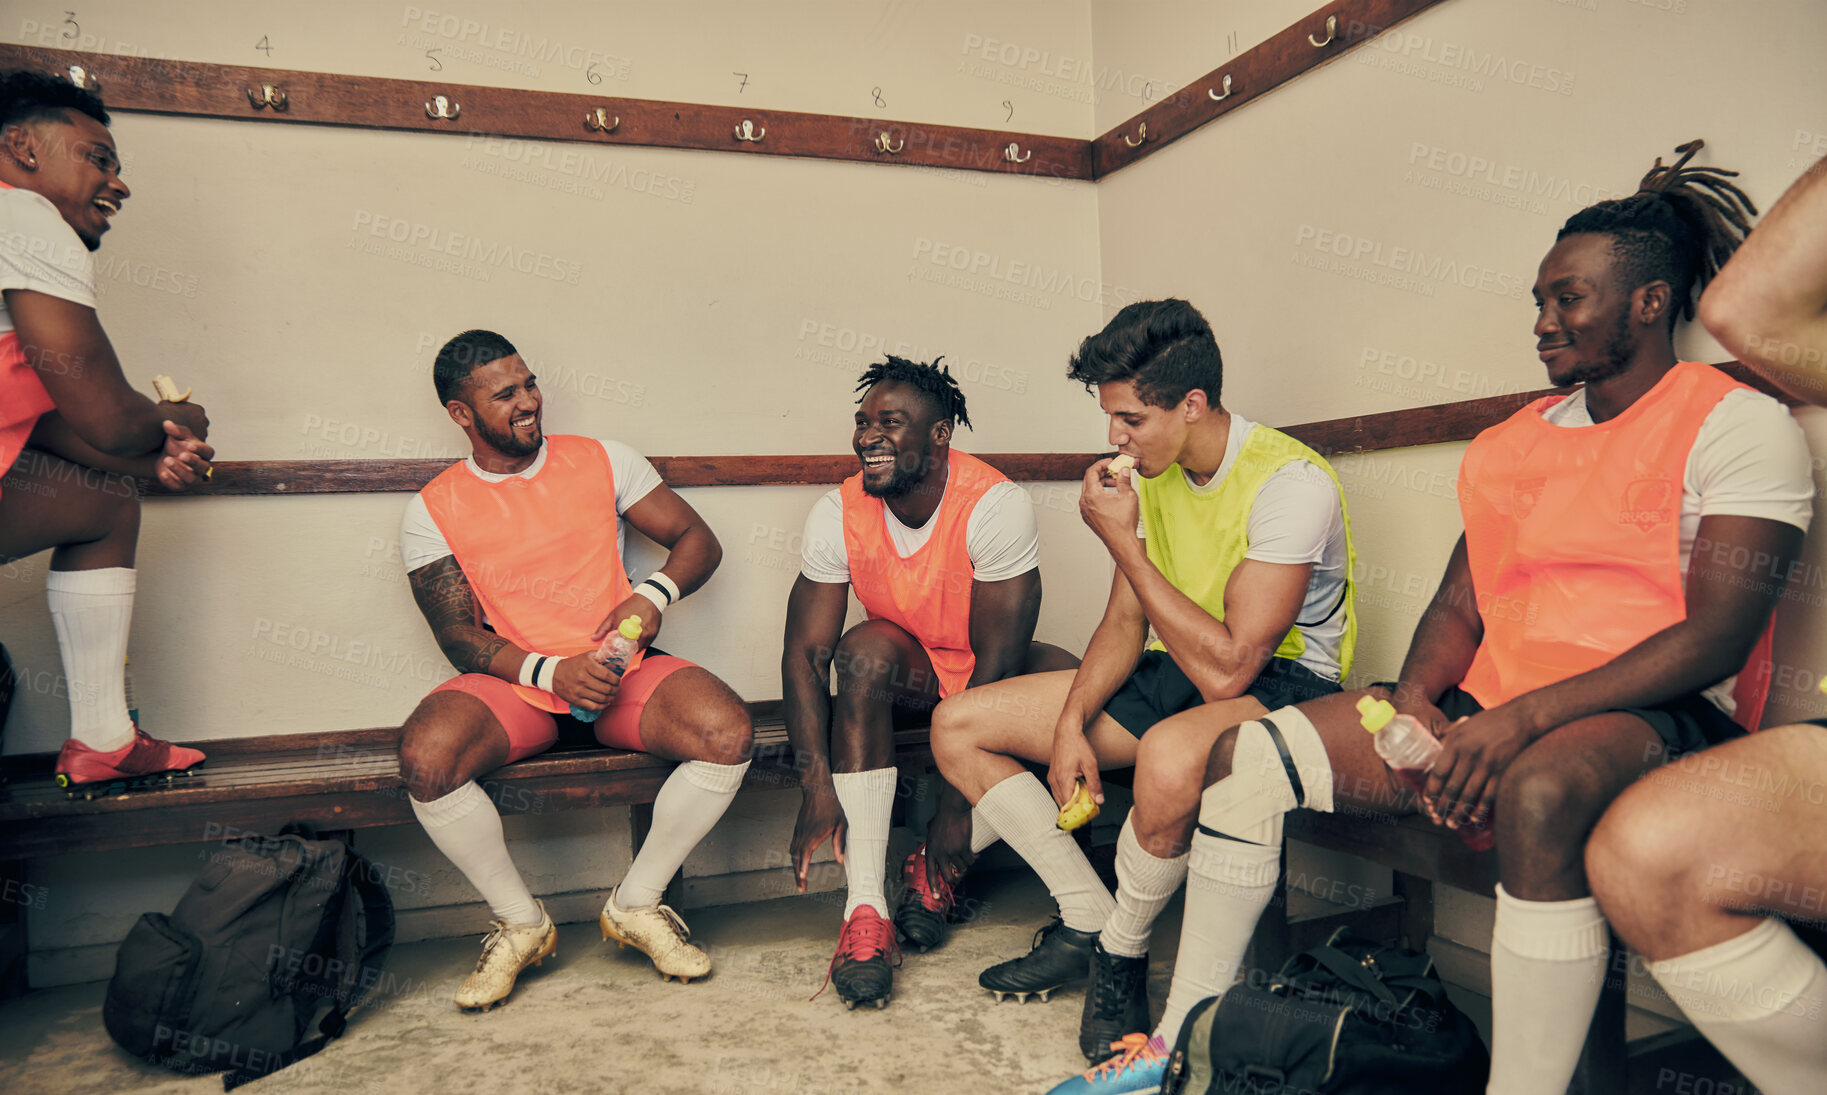 Buy stock photo Locker room, motivation and rugby team laughing together in strategy discussion or game plan. Training, fitness and group of winning sports players planning teamwork, happy men in cloakroom together.